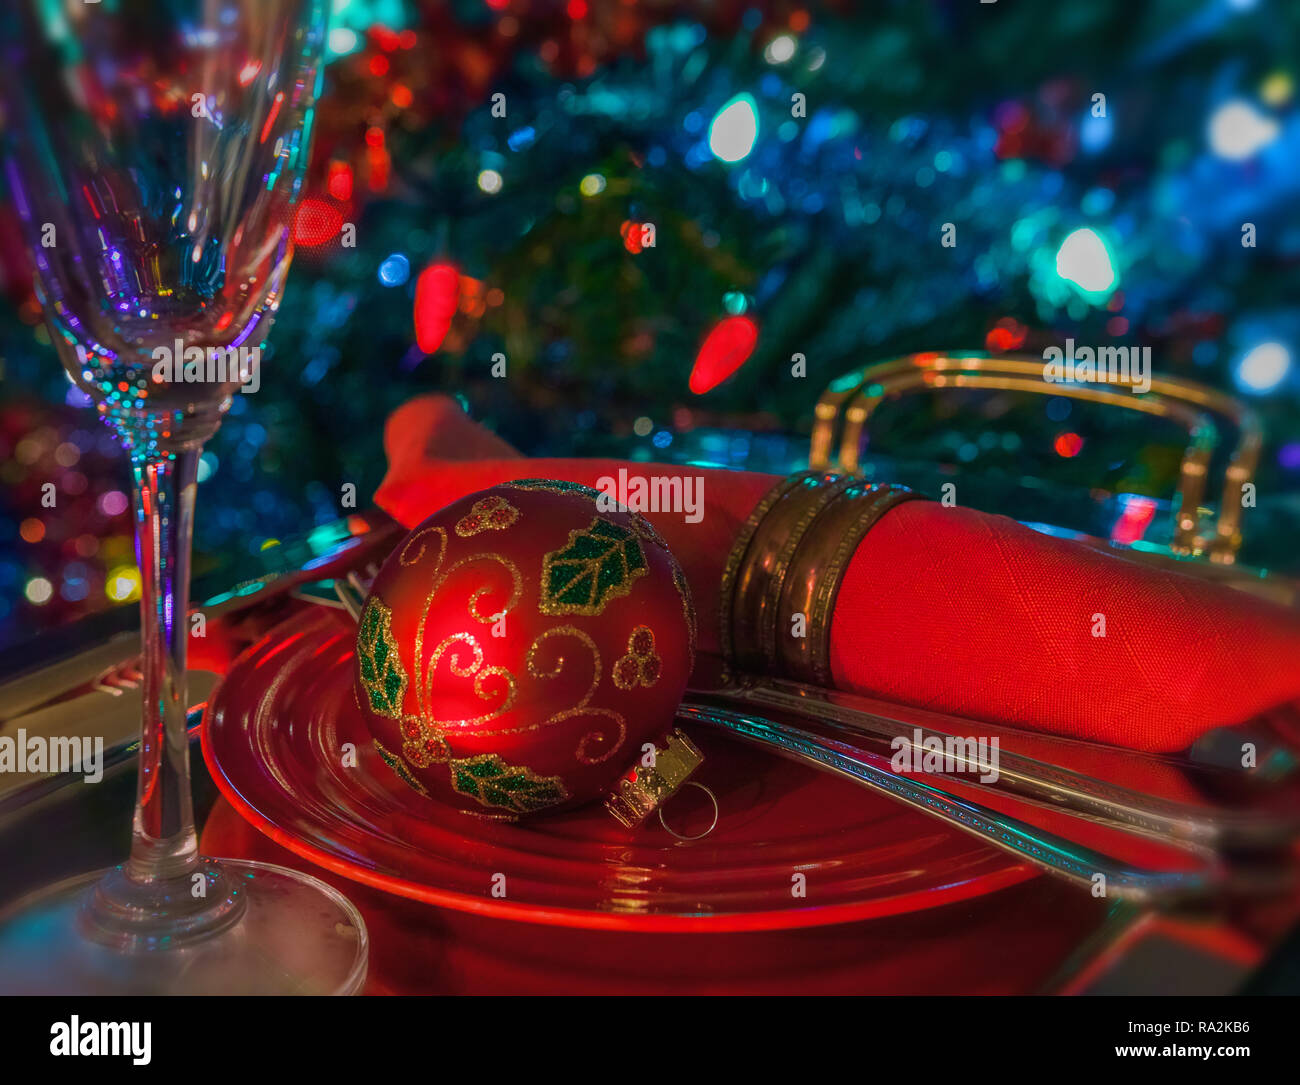 A table service prepared for Christmas or New Year Eve. Stock Photo